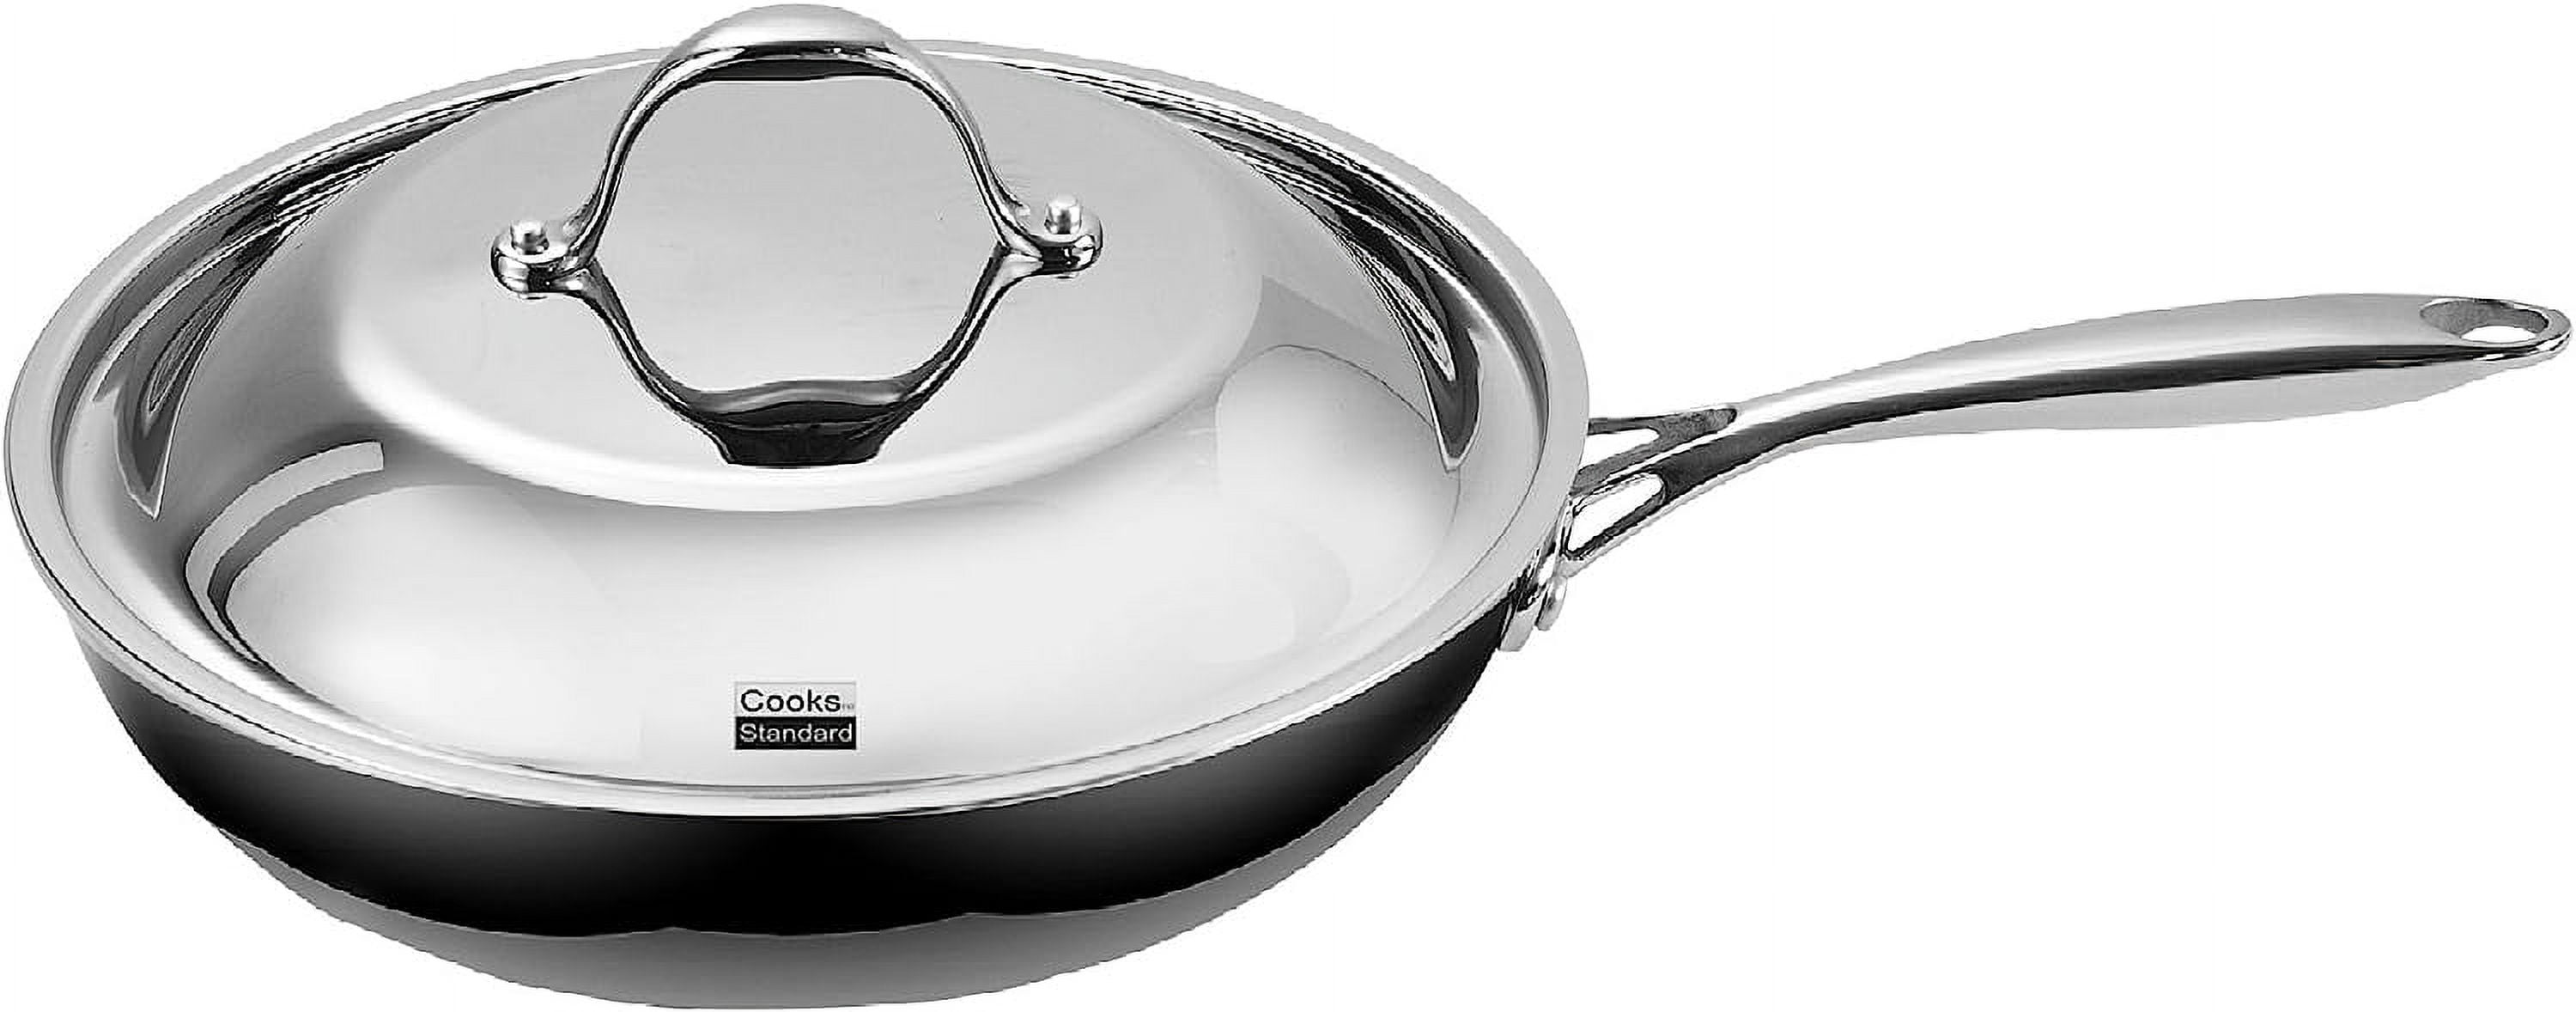 Cooks Standard 10 Piece Multi-Ply Clad Cookware Set, Stainless Steel, set -  Kroger